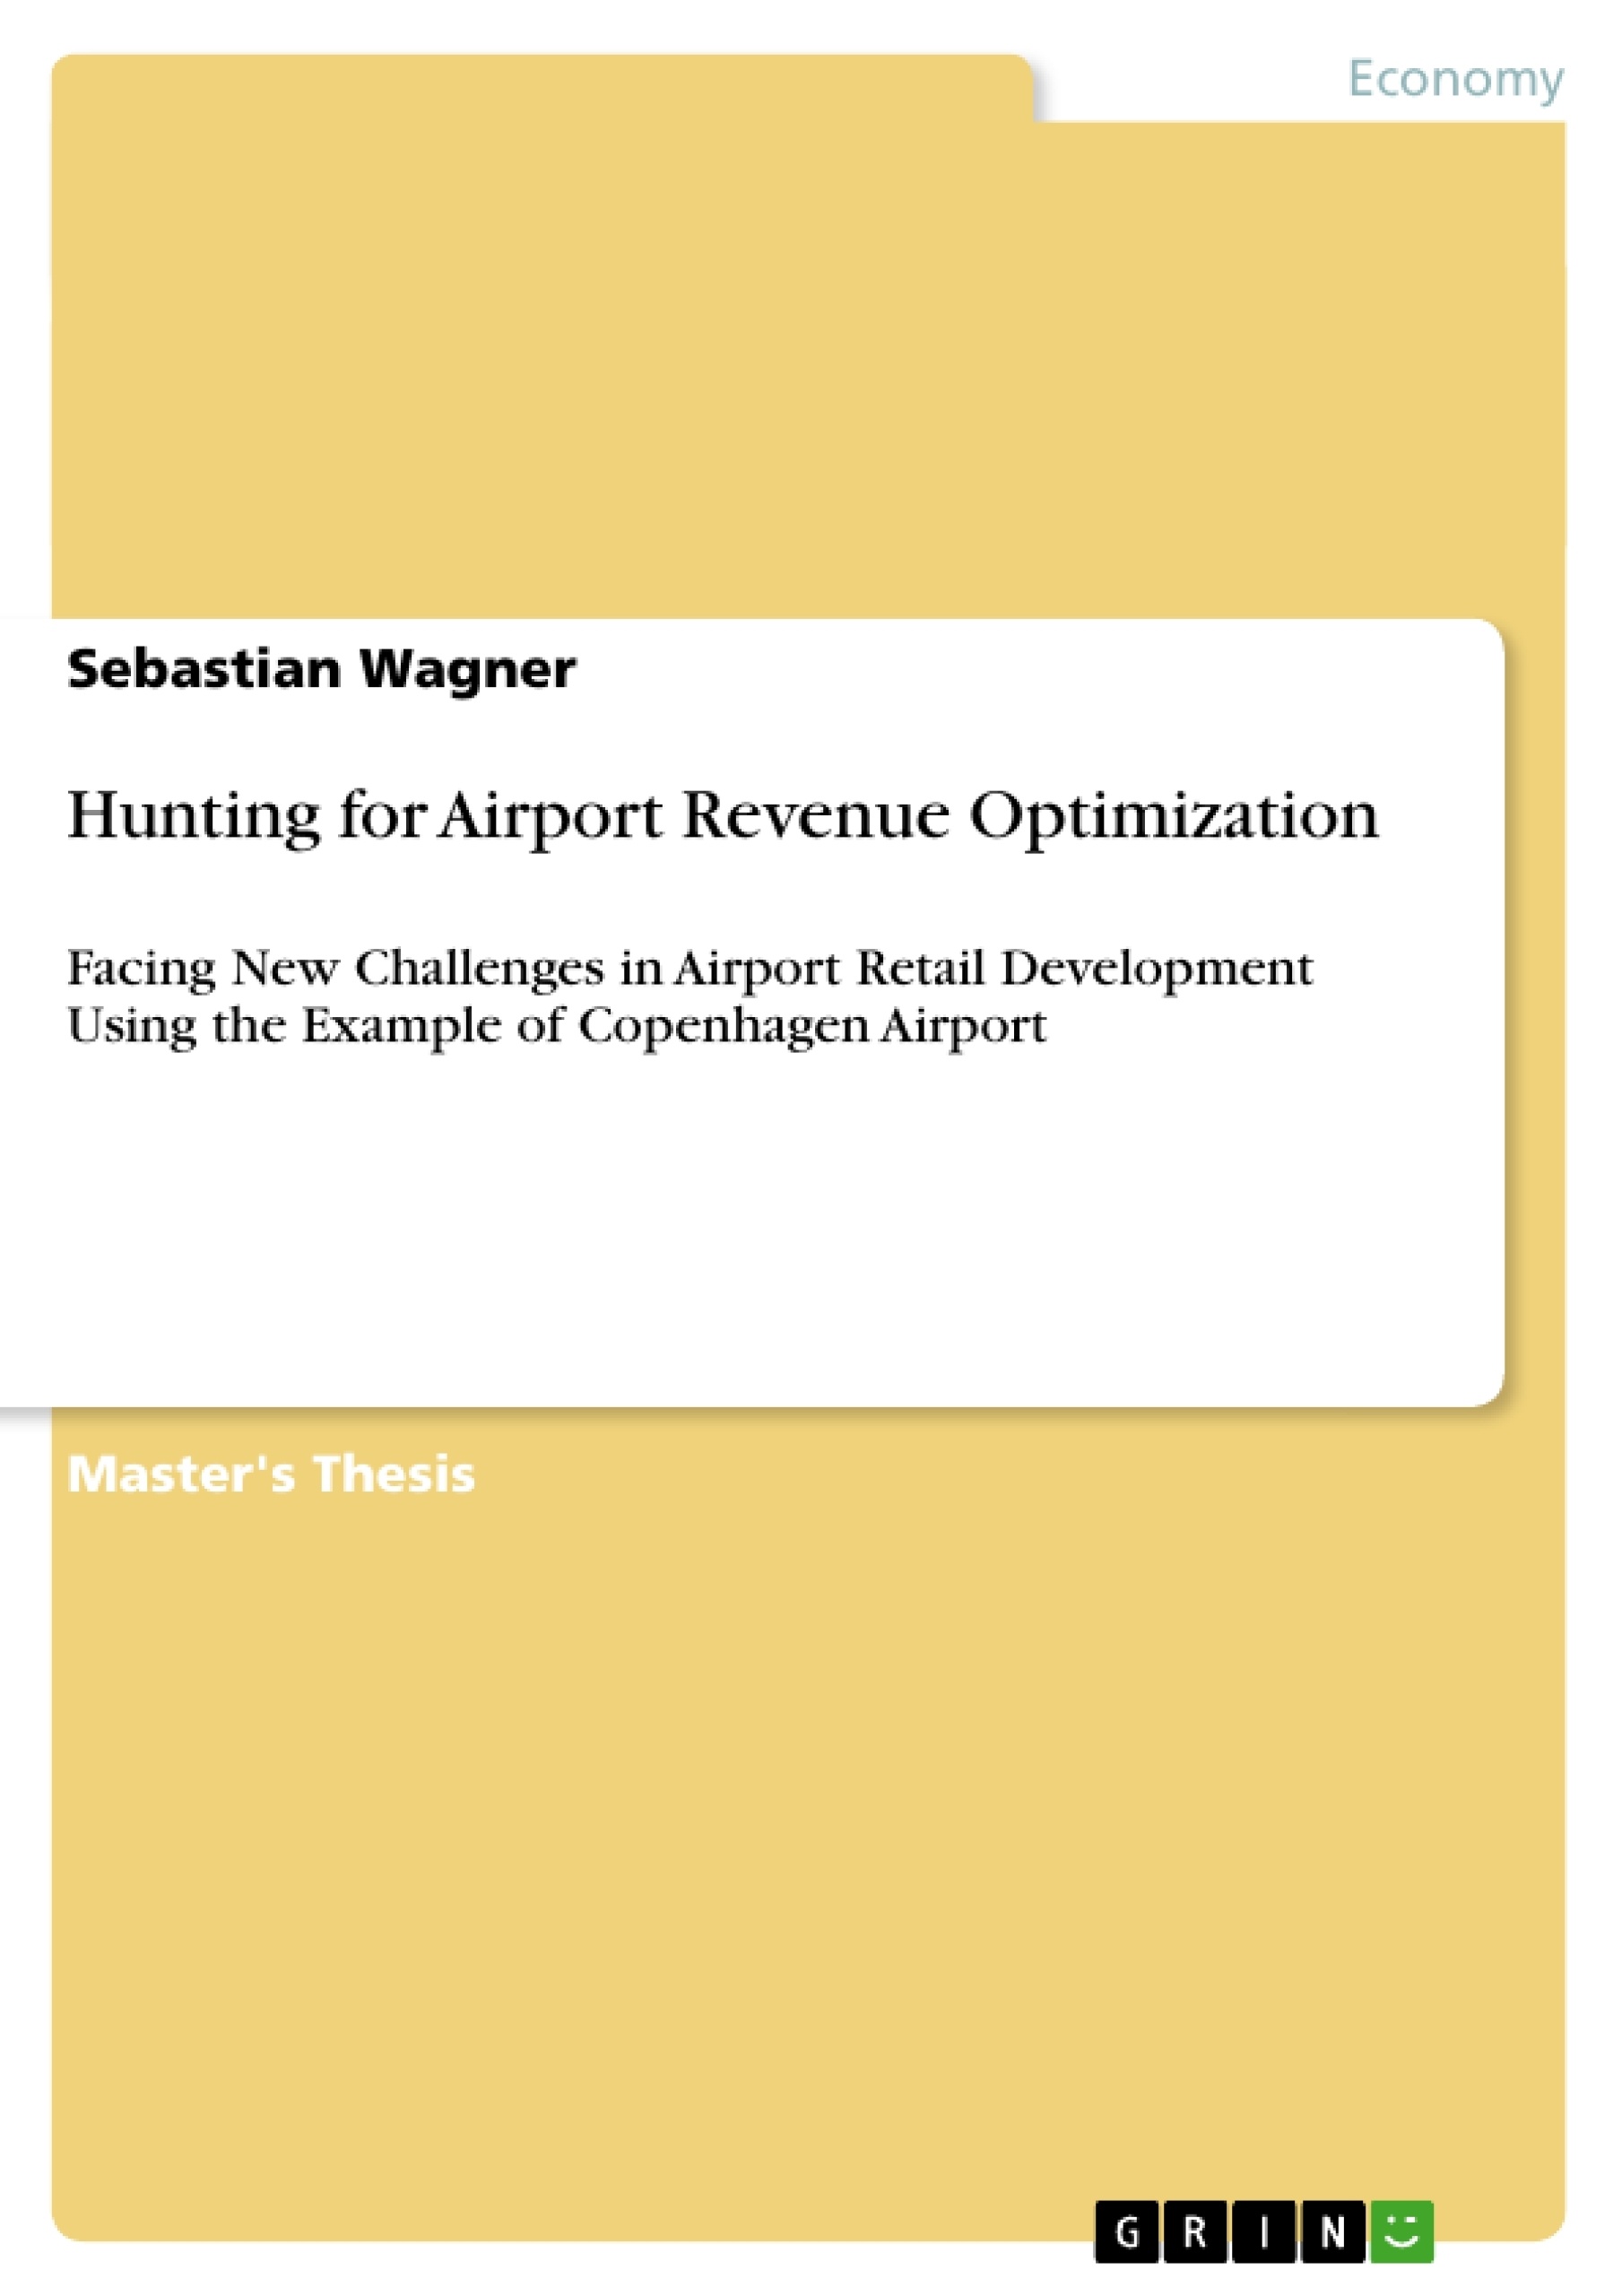 Título: Hunting for Airport Revenue Optimization